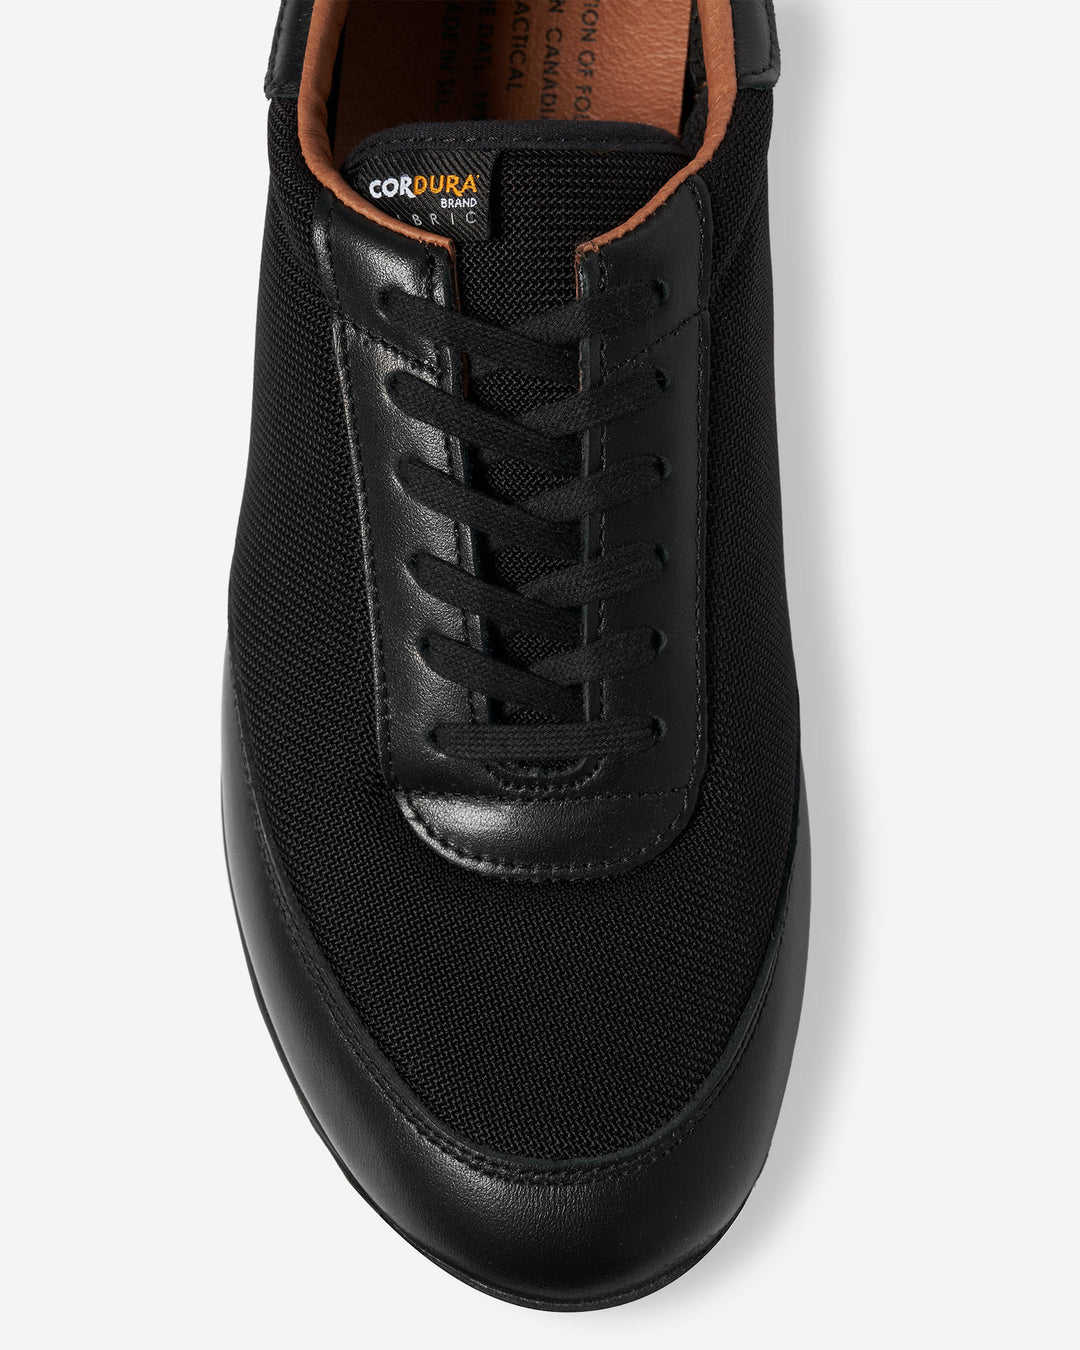 Canadian Military Trainer - Black